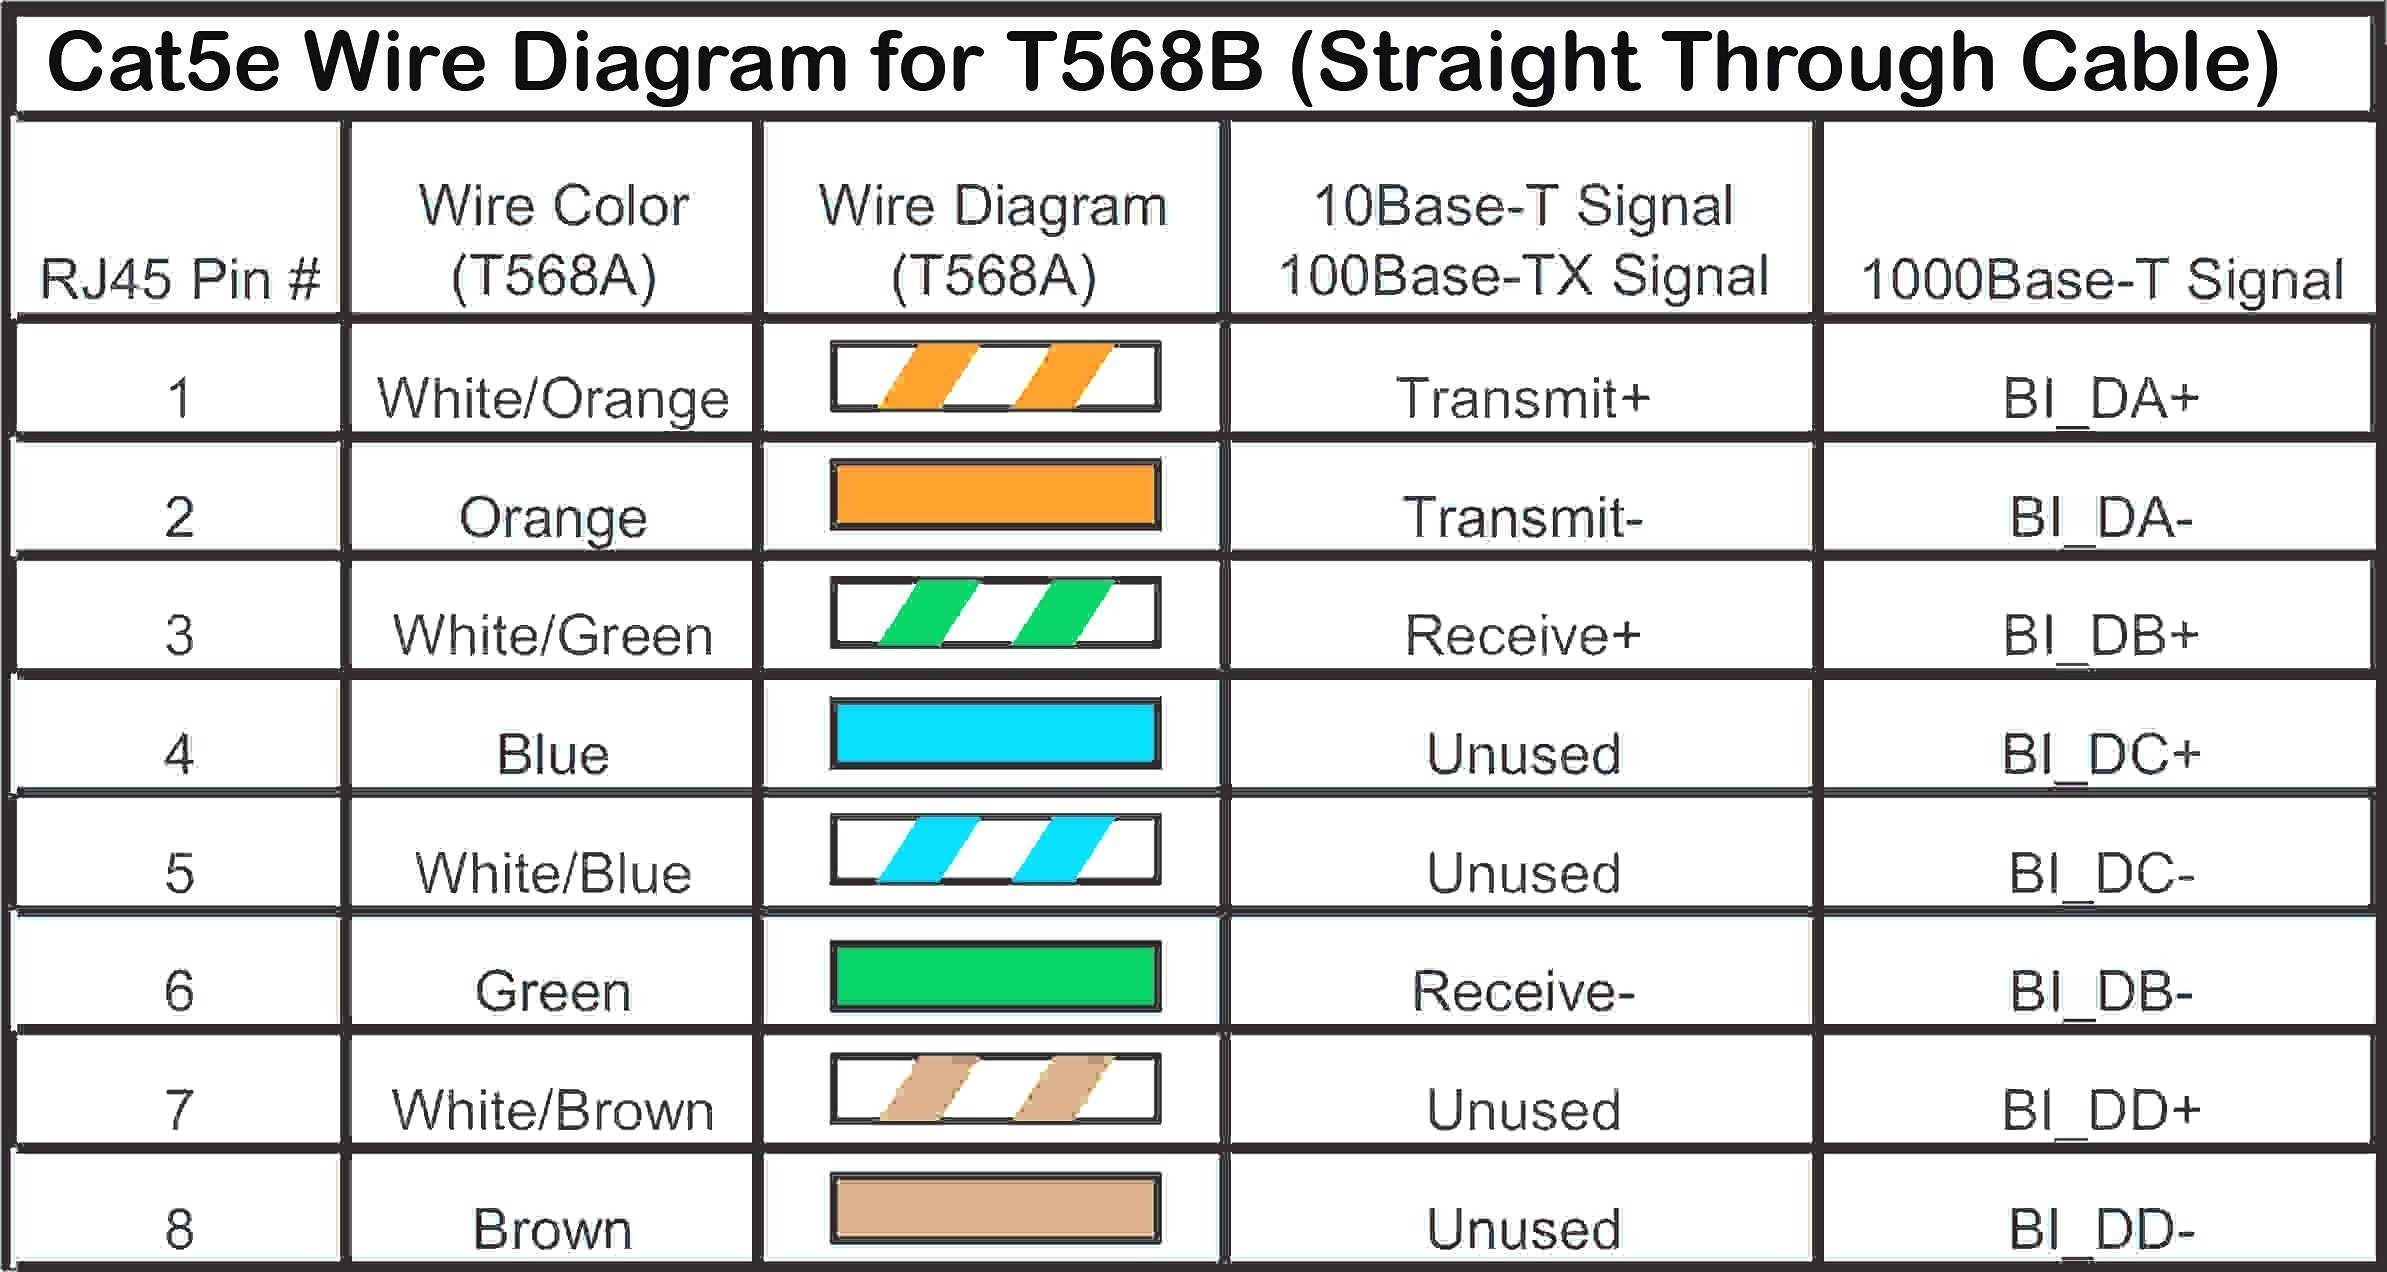 Wiring Diagram for A Cat5 Cable New Cat5e Wire Diagram New Ethernet Cable Wiring Diagram New